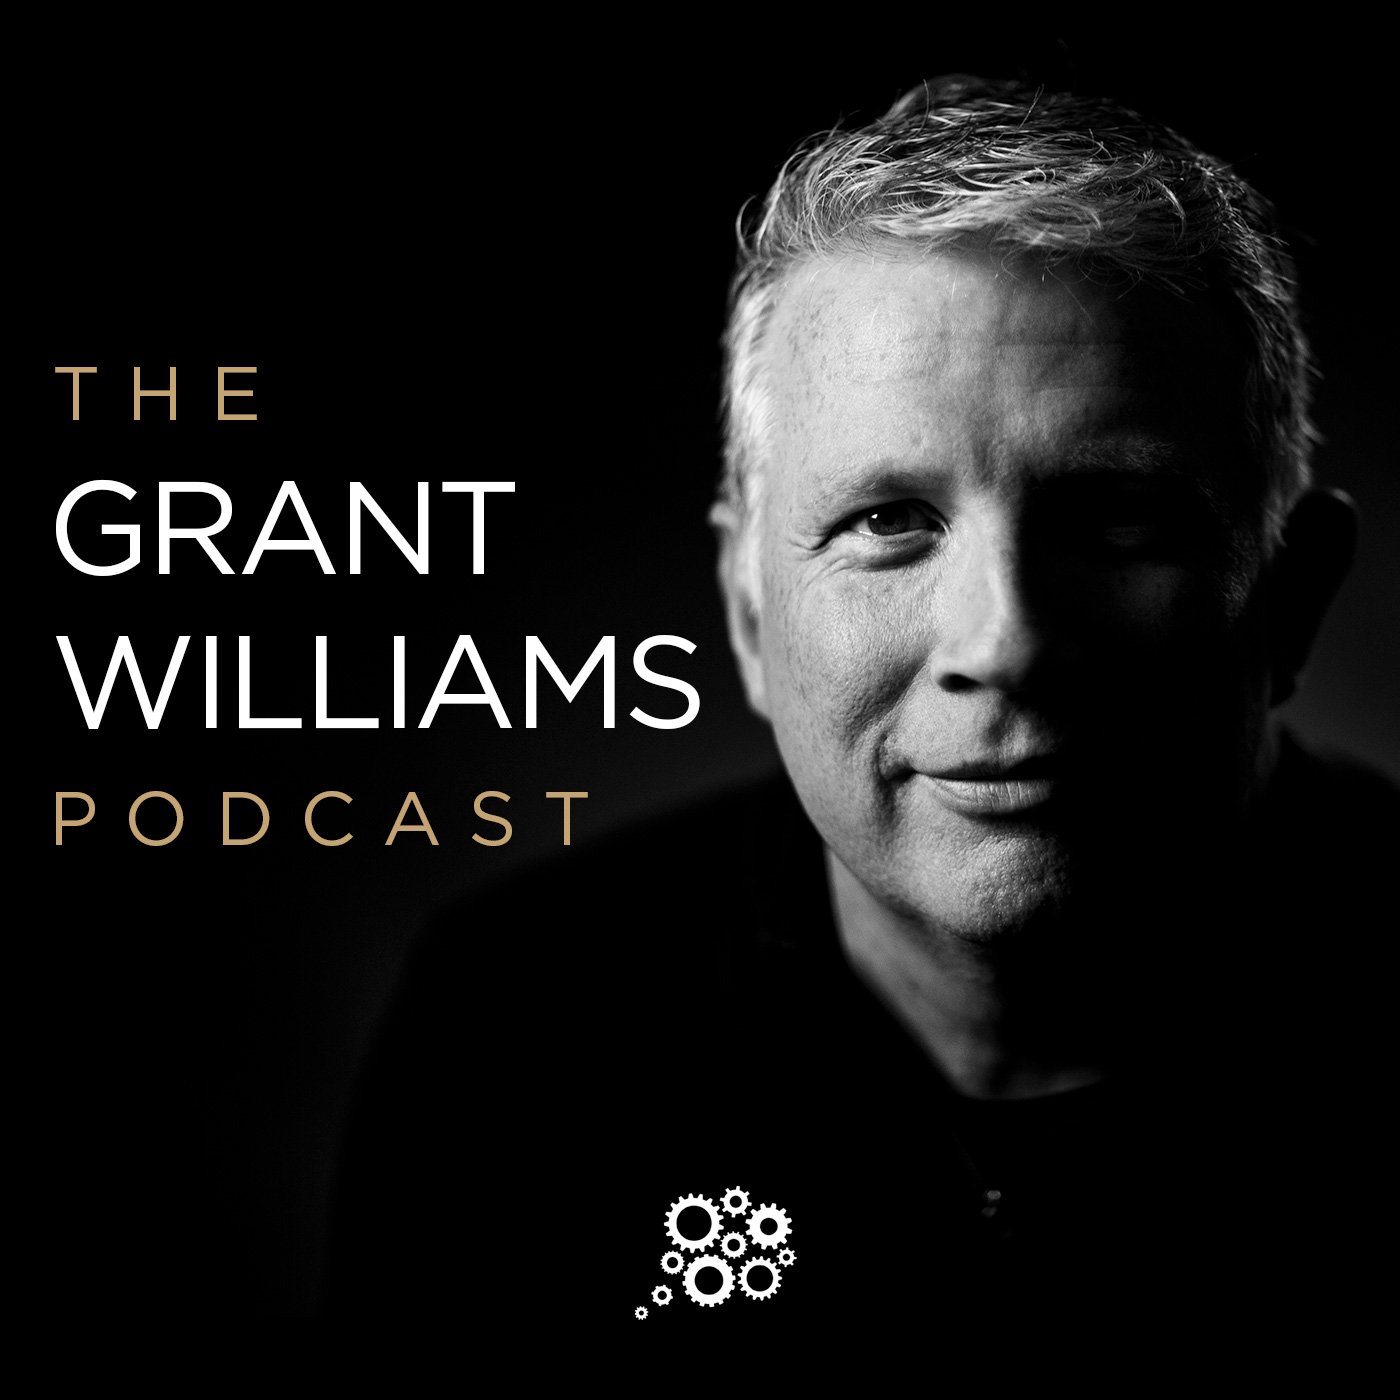 The Grant Williams Podcast: Daniel Want, Prerequisite Capital Management